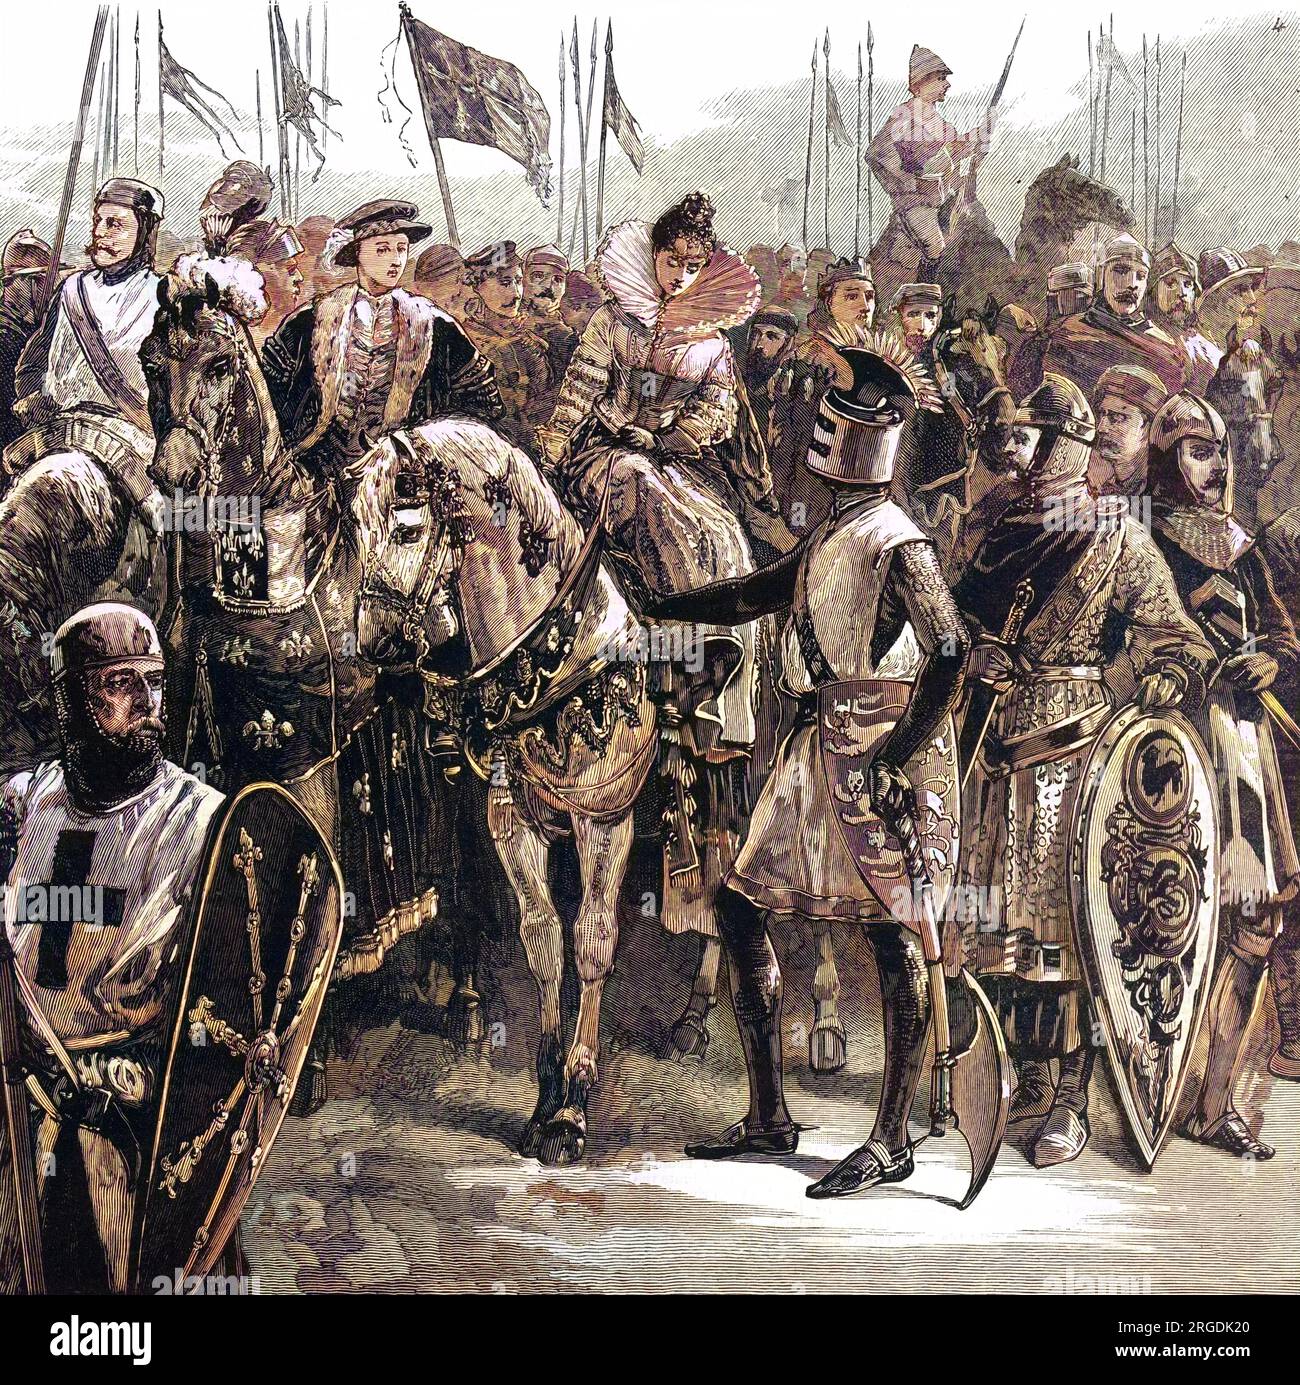 Kings and Queens of England with Barons, Knights and Crusaders who were all part of the Lord Mayor of London's Show of 1884. At centre, Richard I comforts the horse of Queen Elizabeth I. Stock Photo